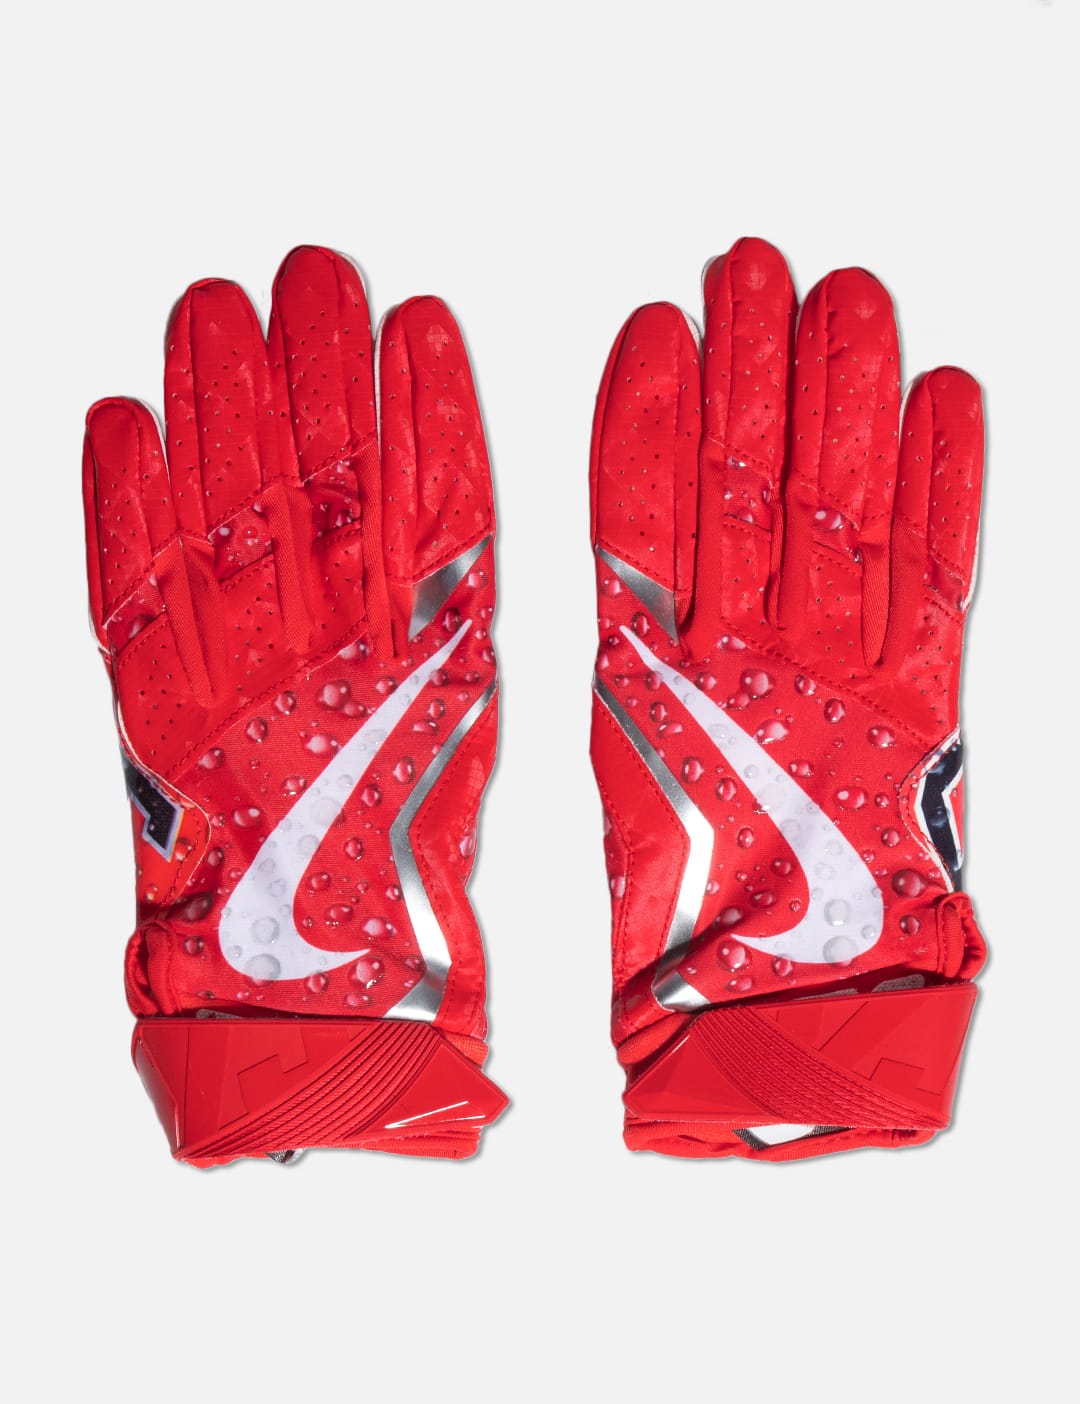 Supreme - Supreme x Nike Vapor Jet 4.0 Football Gloves | HBX - Globally  Curated Fashion and Lifestyle by Hypebeast